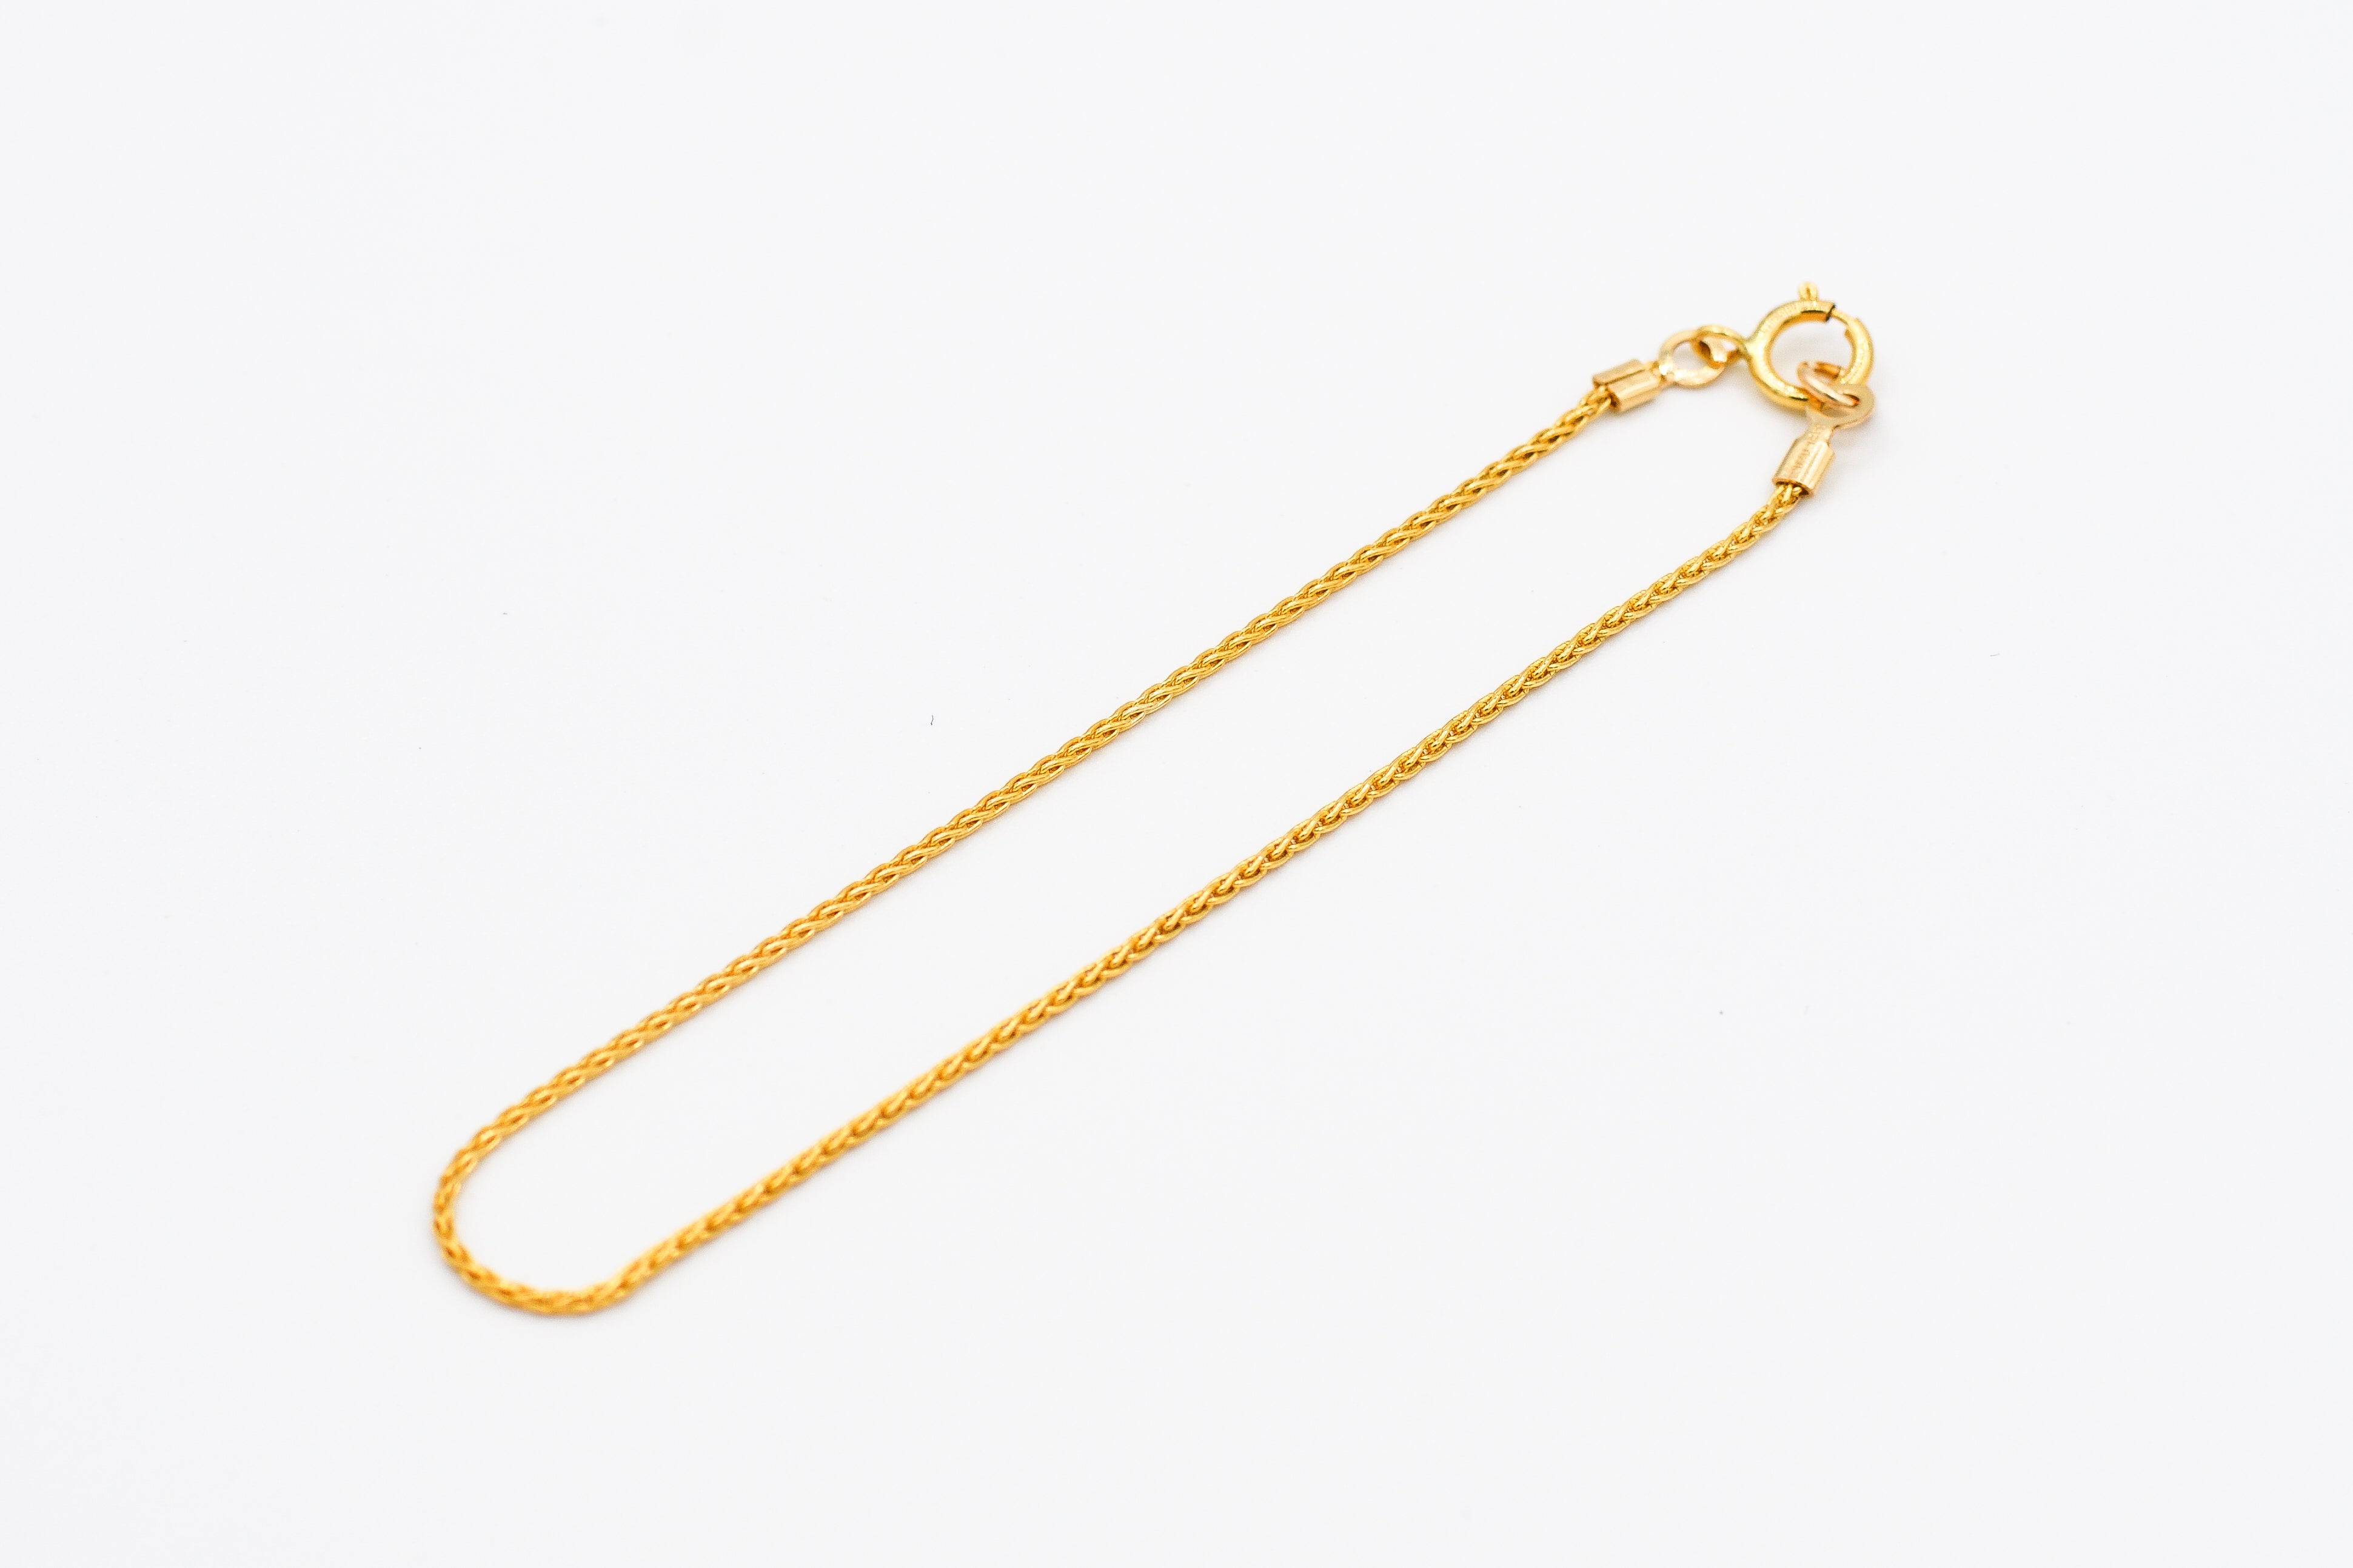 Picture of the Syana bracelet, a Nelumbo jewelry piece, handmade from 14k solid gold